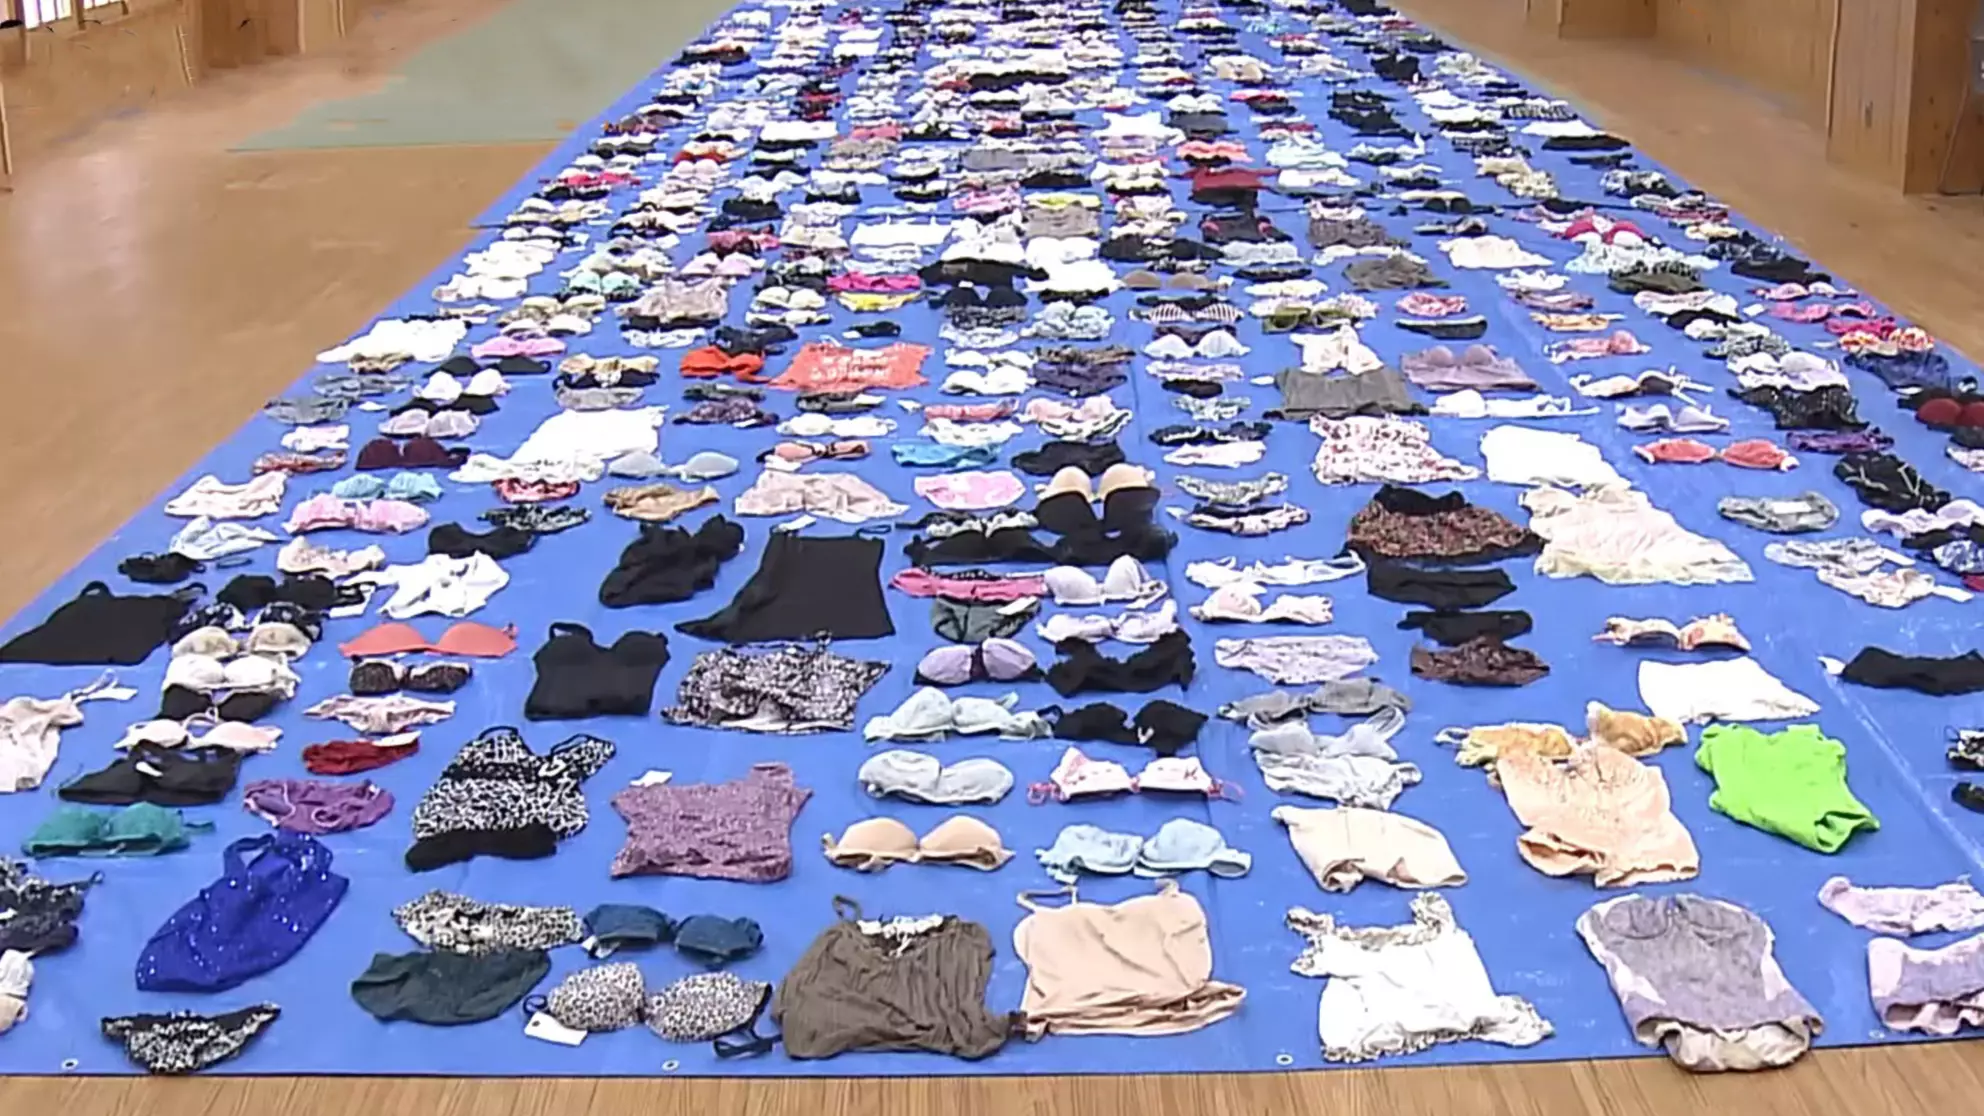 Man Arrested After 'Stealing 700 Pieces Of Women’s Underwear' In Japan